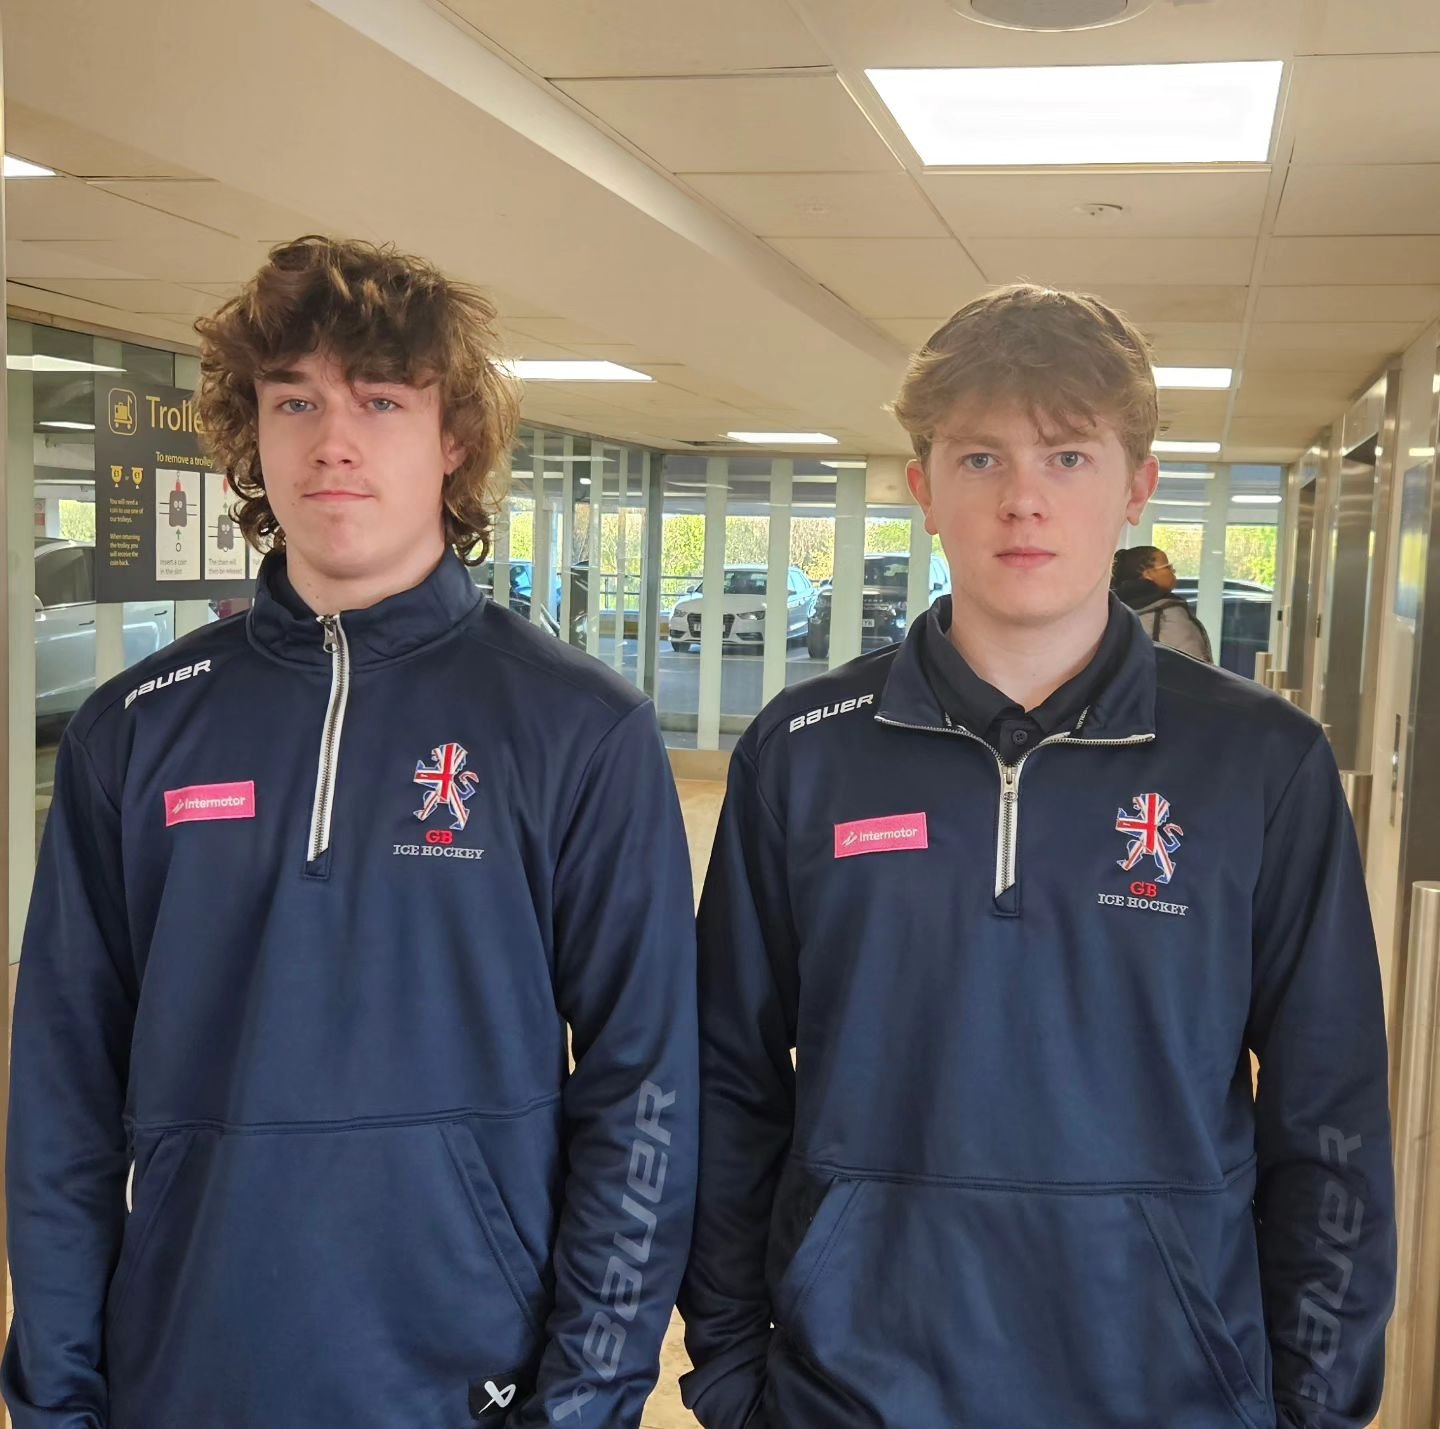 It all got a bit hectic down at Gatwick Airport - South Terminal - Departures this morning with THREE of our young pups heading out on European adventures! 

Forwards Daragh Spawforth and Danny Harrison boarded a flight to Latvia as part of the @team